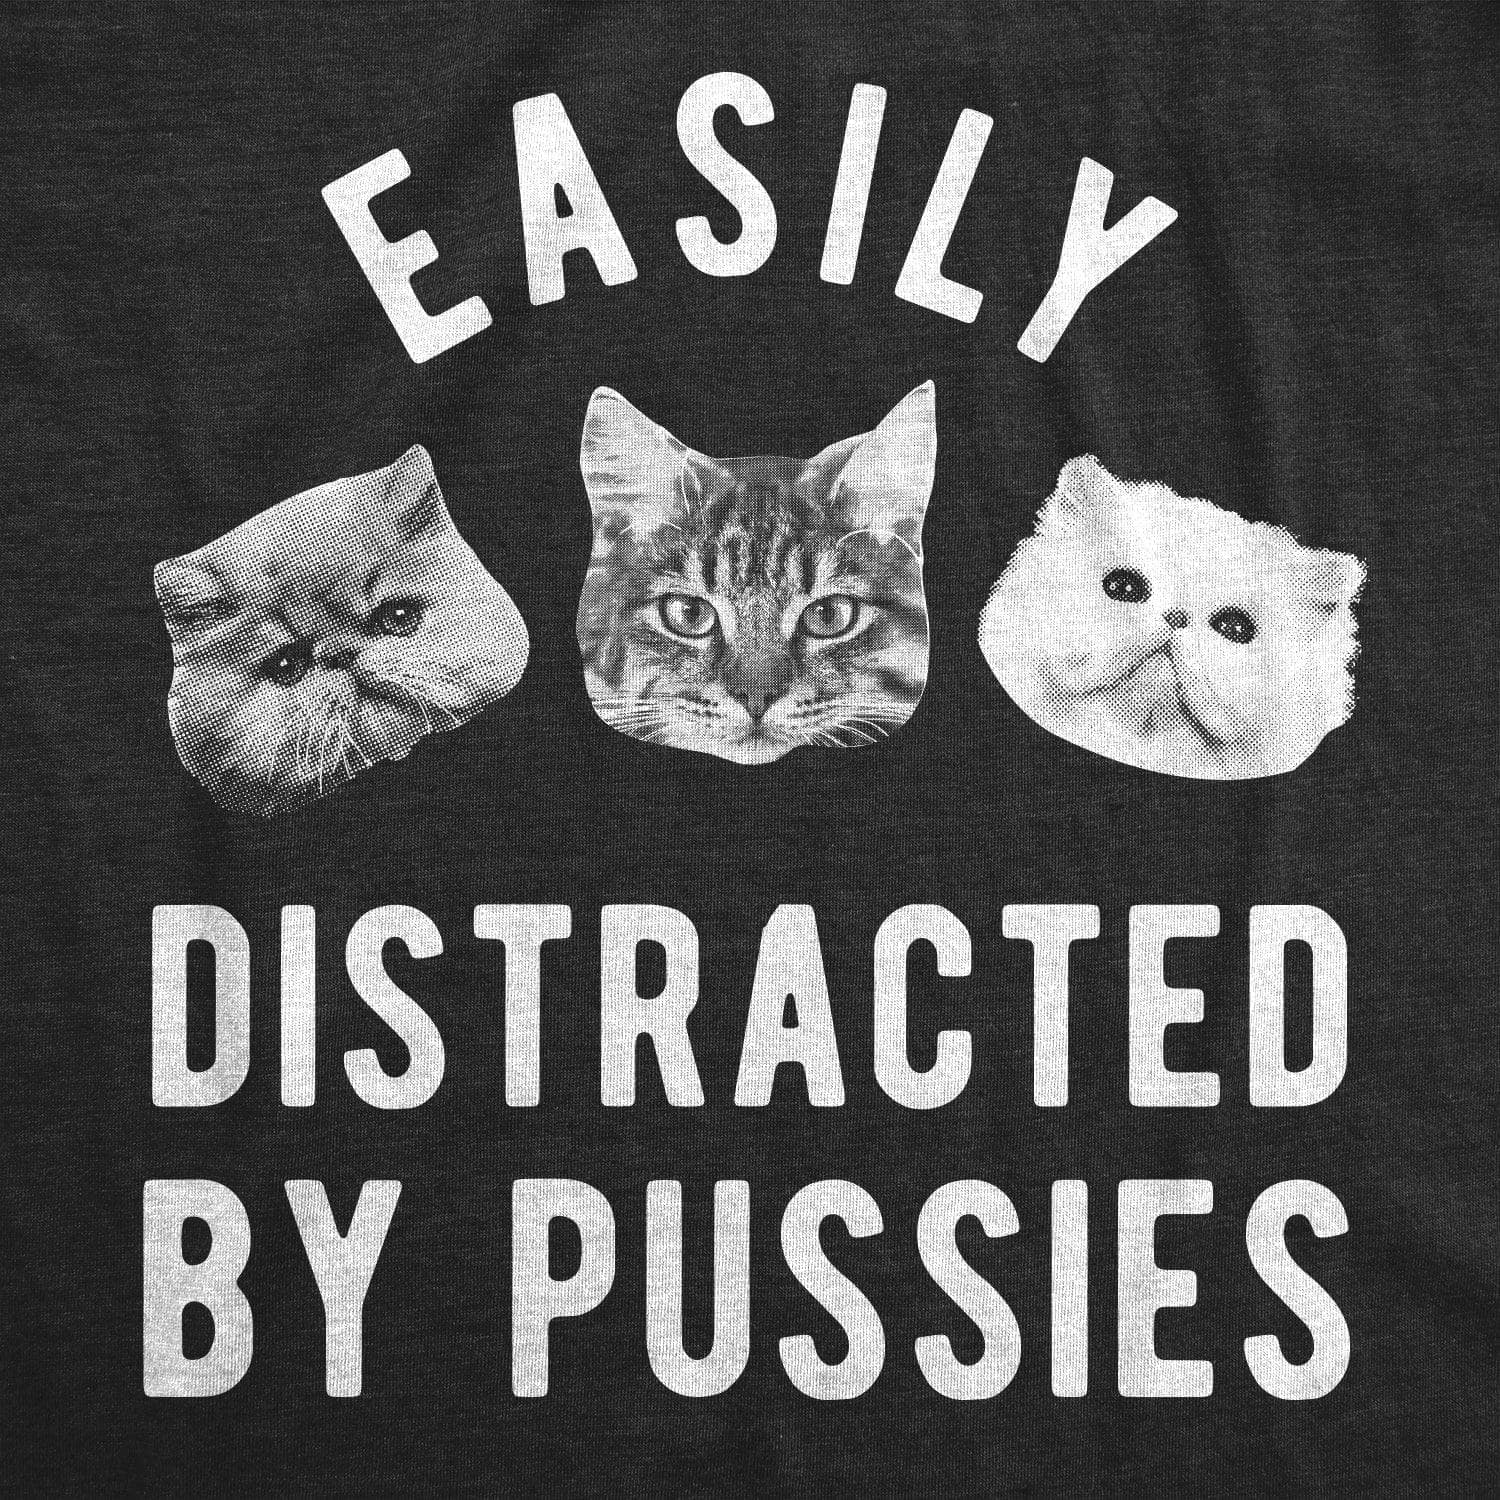 Easily Distracted By Pussies Women's Tshirt  -  Crazy Dog T-Shirts